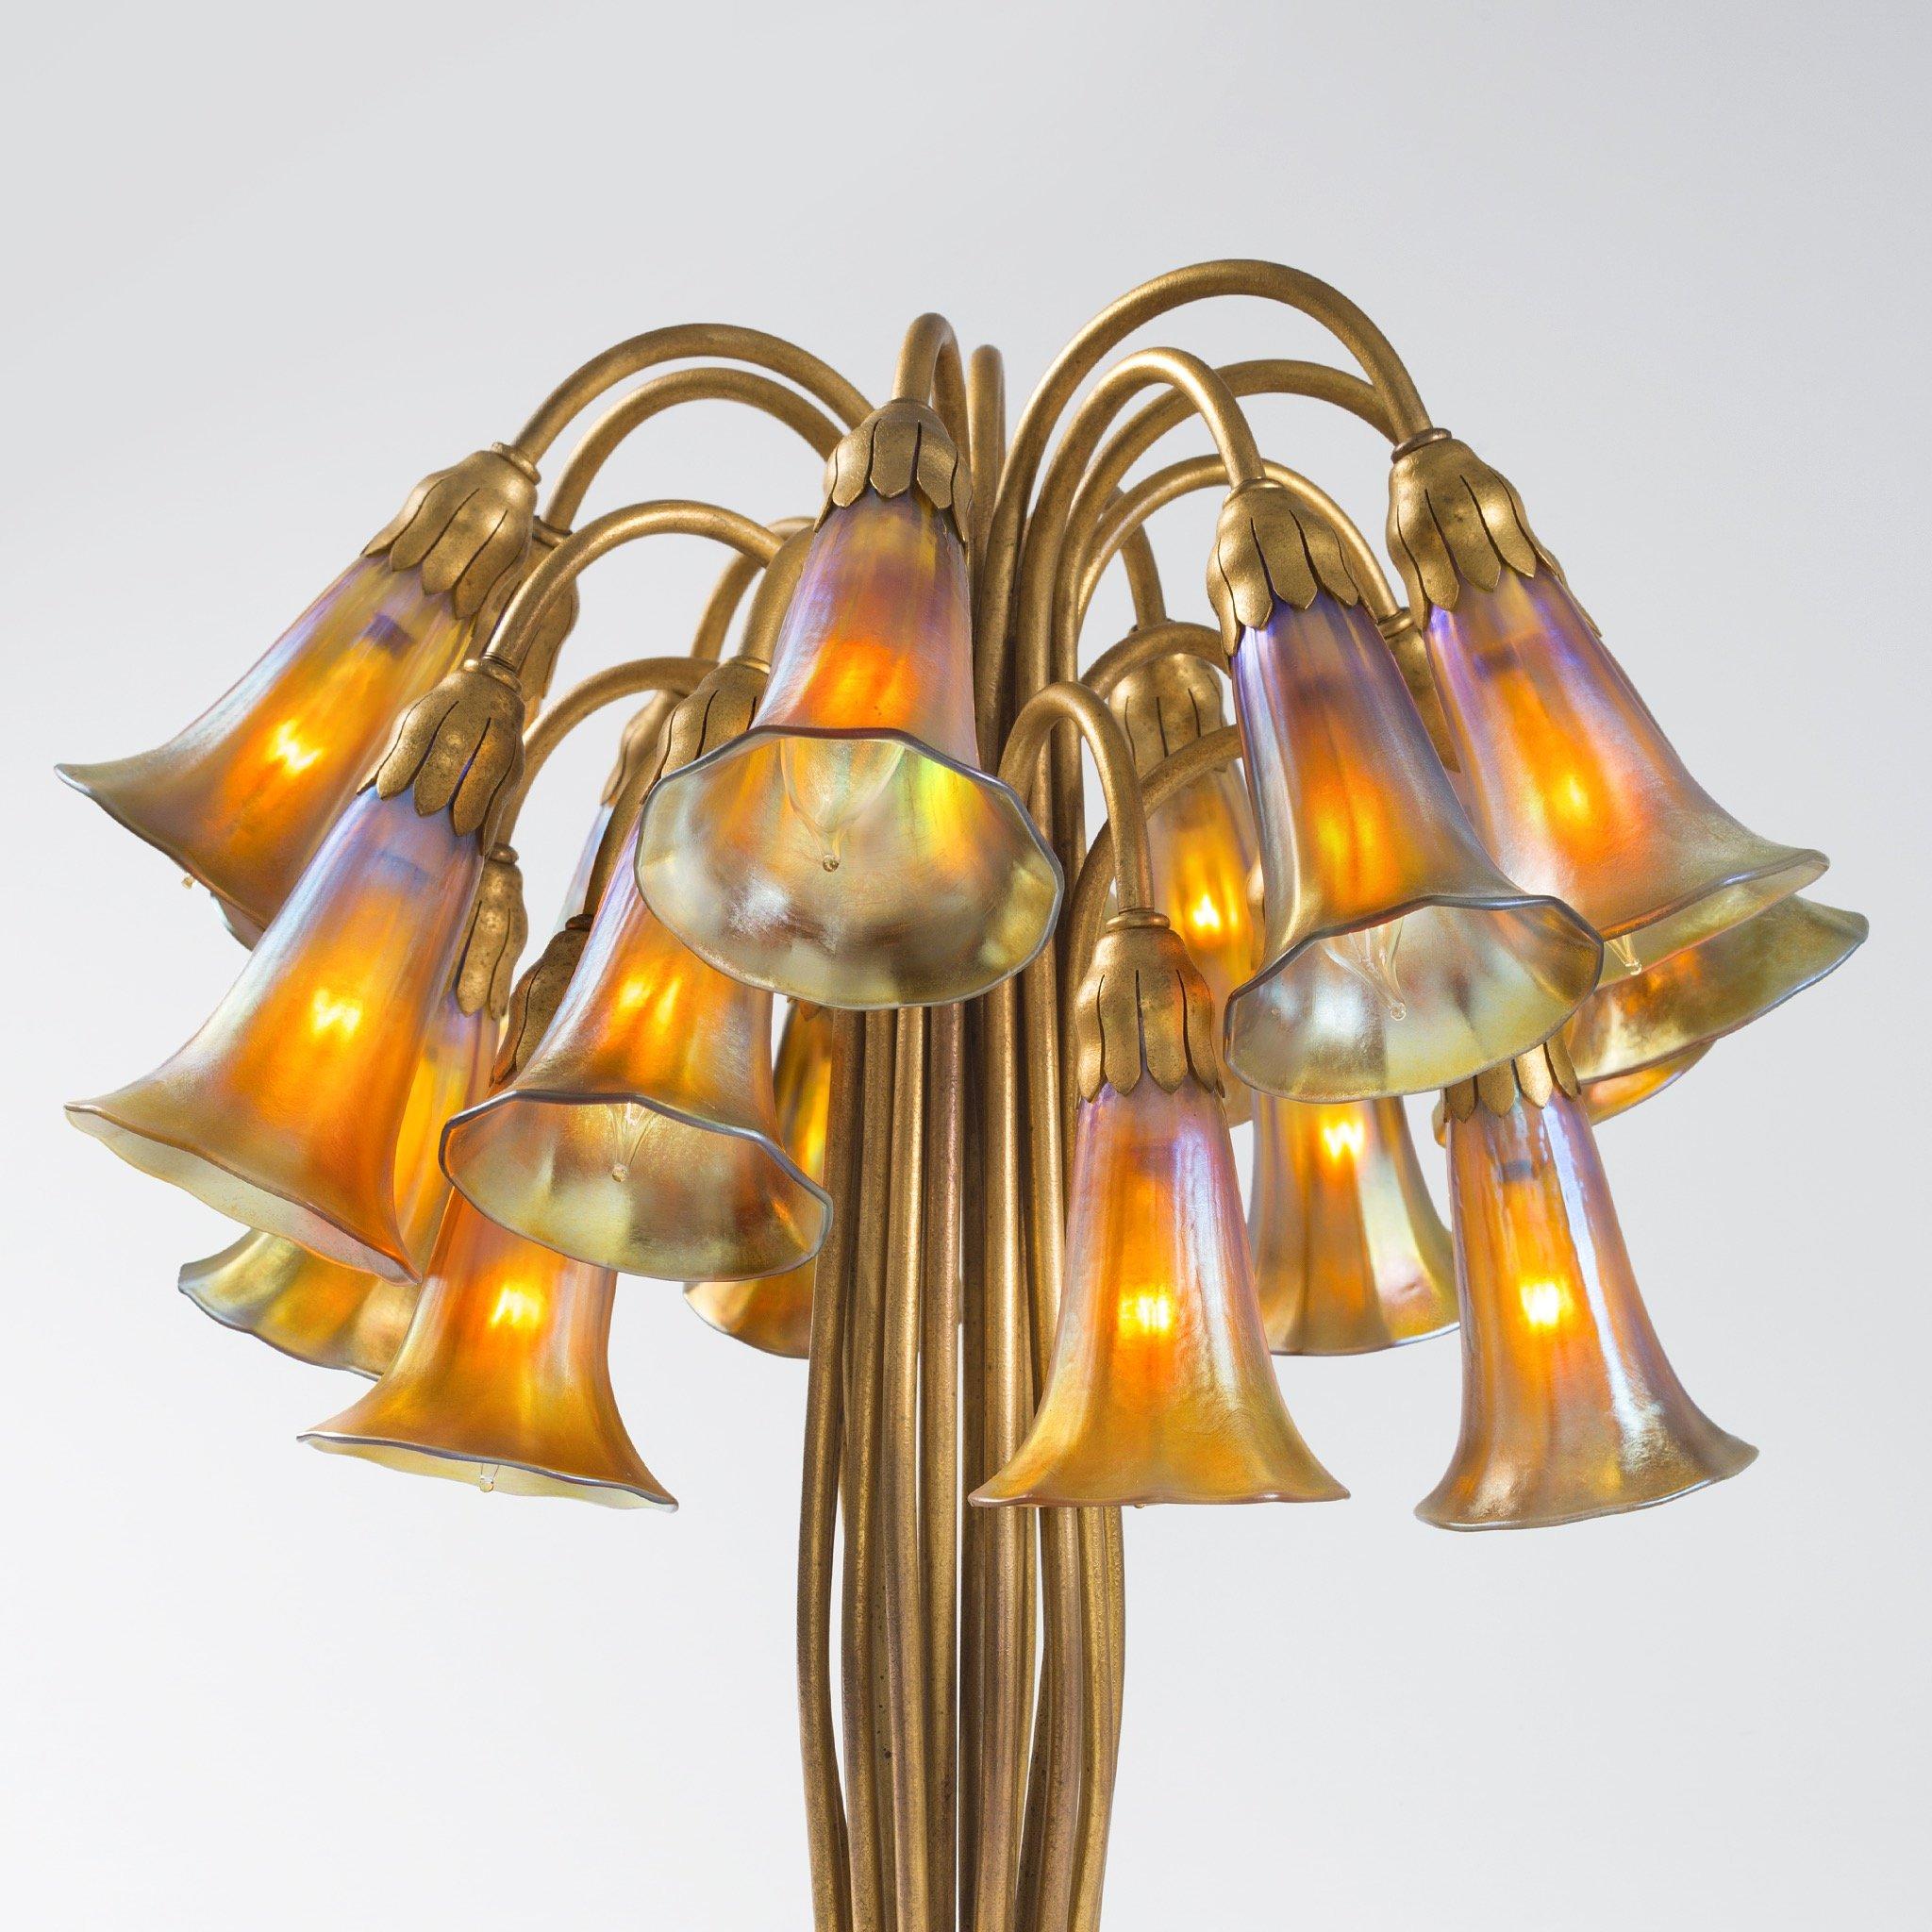 This Tiffany Studios New York glass and bronze 